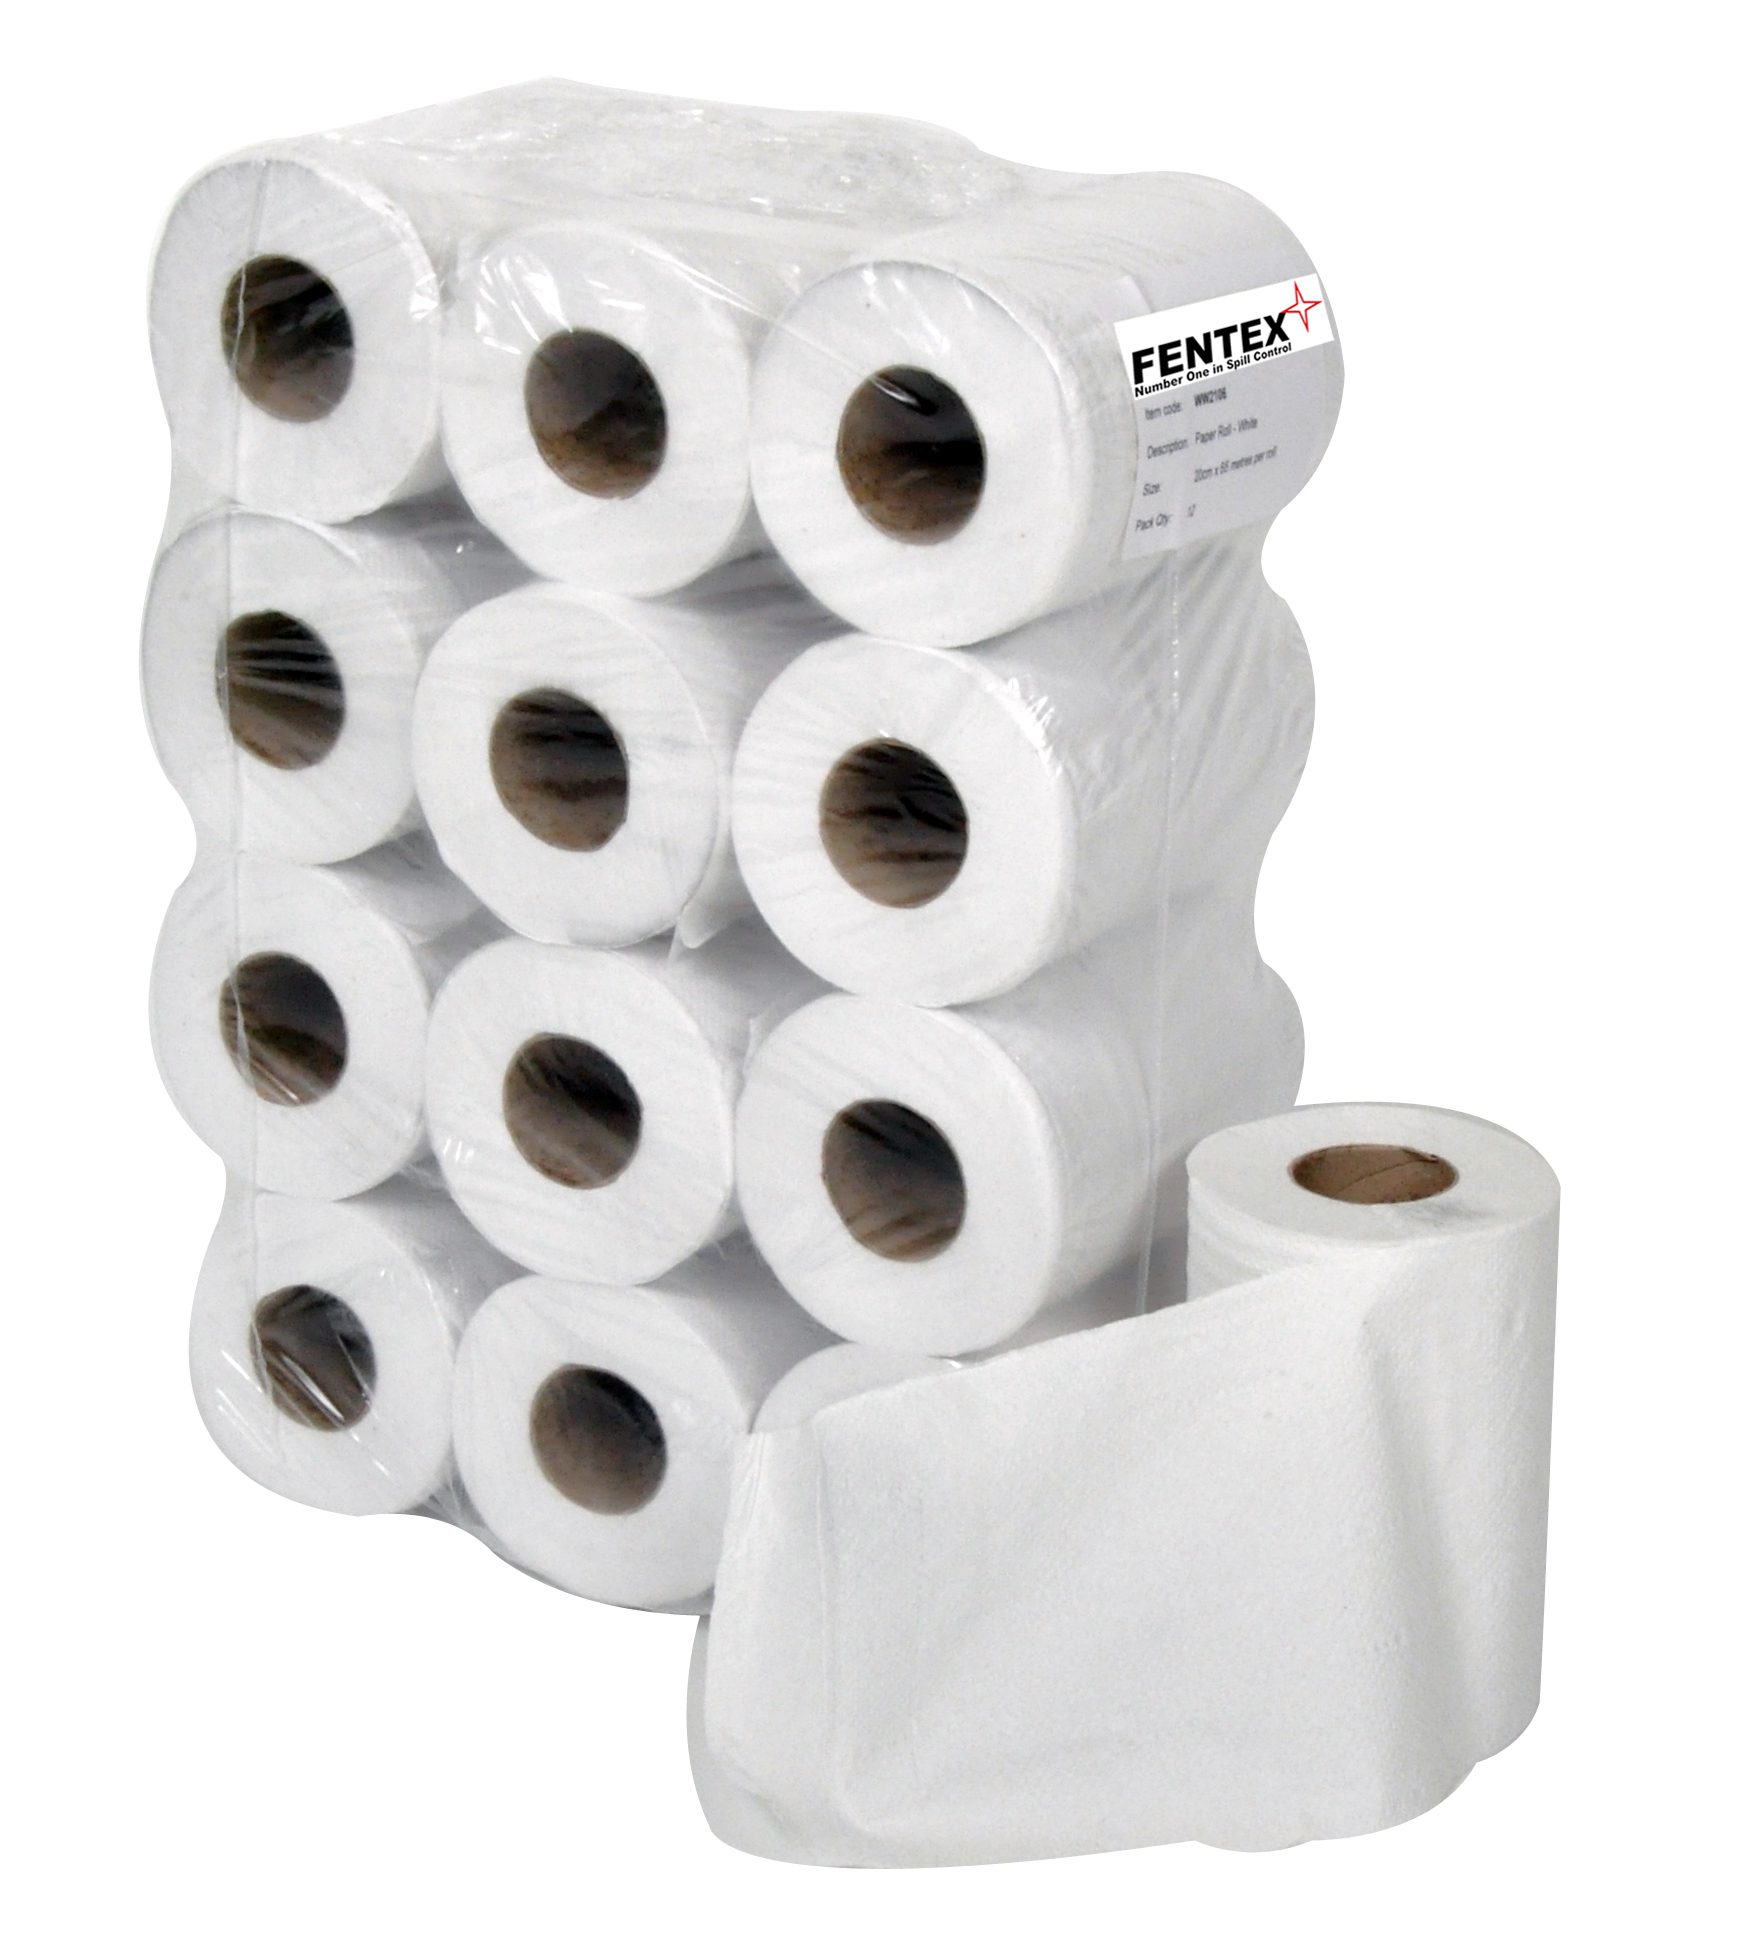 Oil Absorbent Rolls and Pads